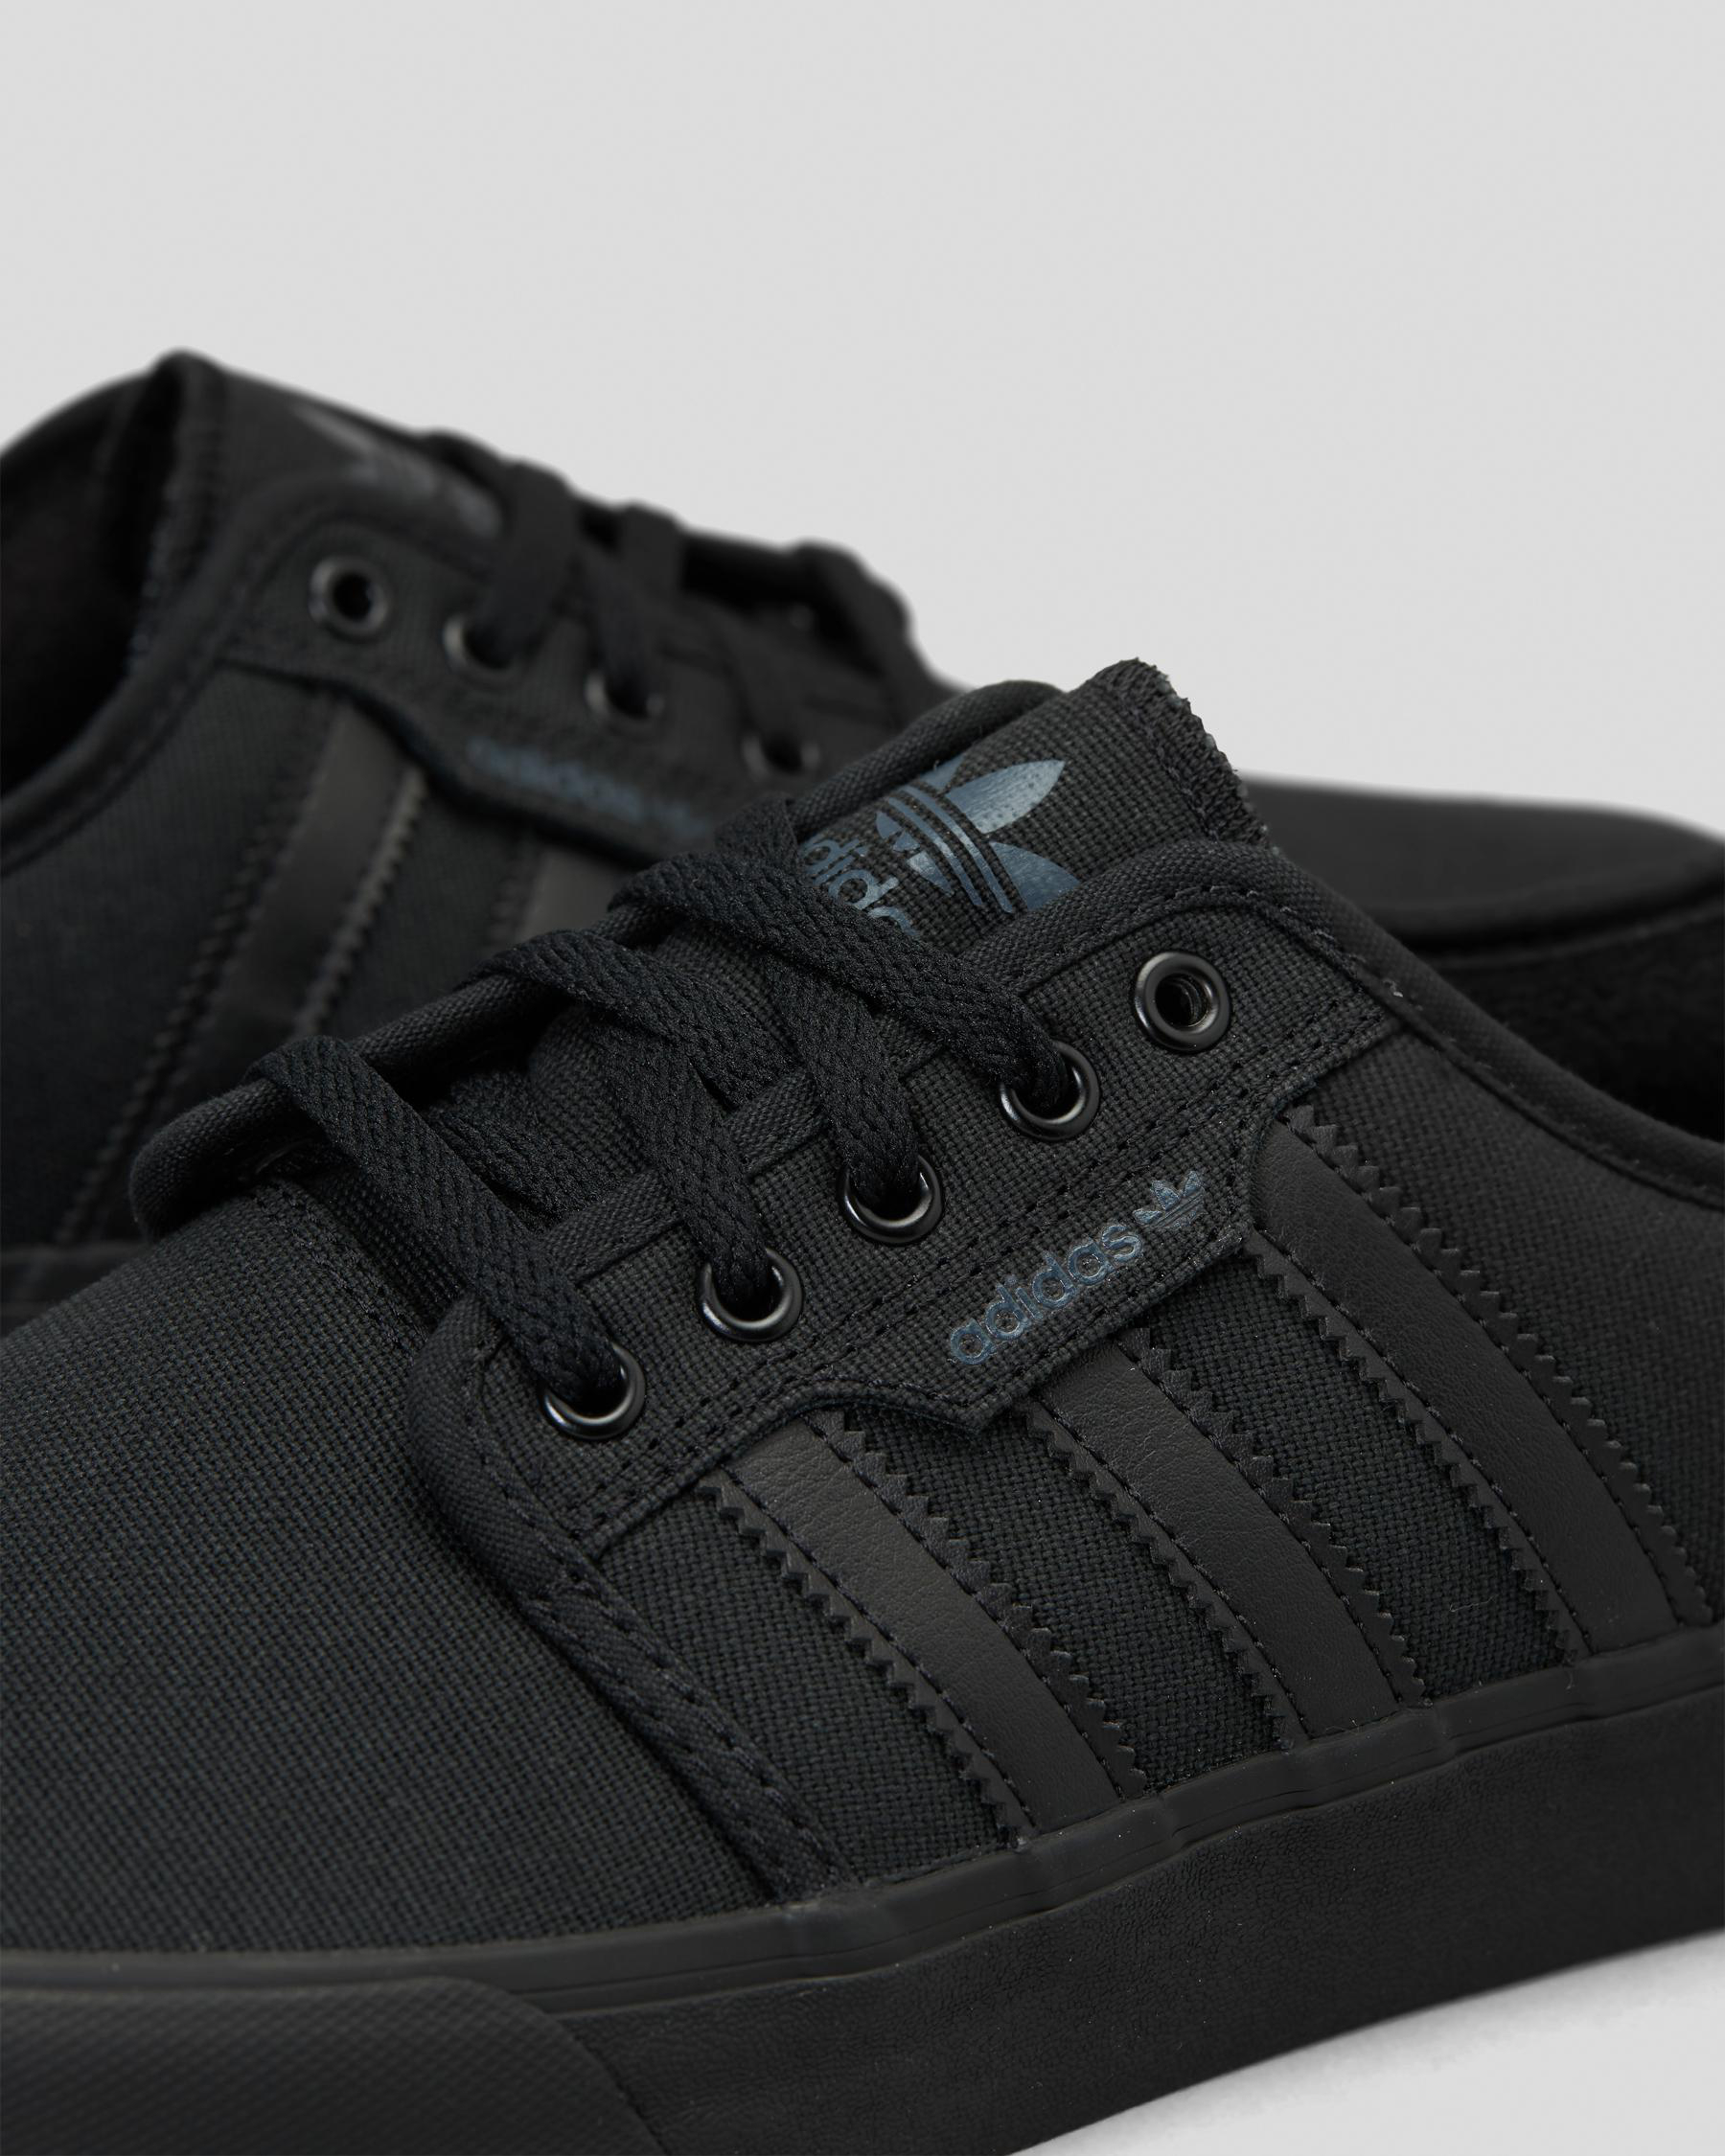 Adidas Seeley XT Shoes In Black/black - Fast Shipping & Easy Returns ...